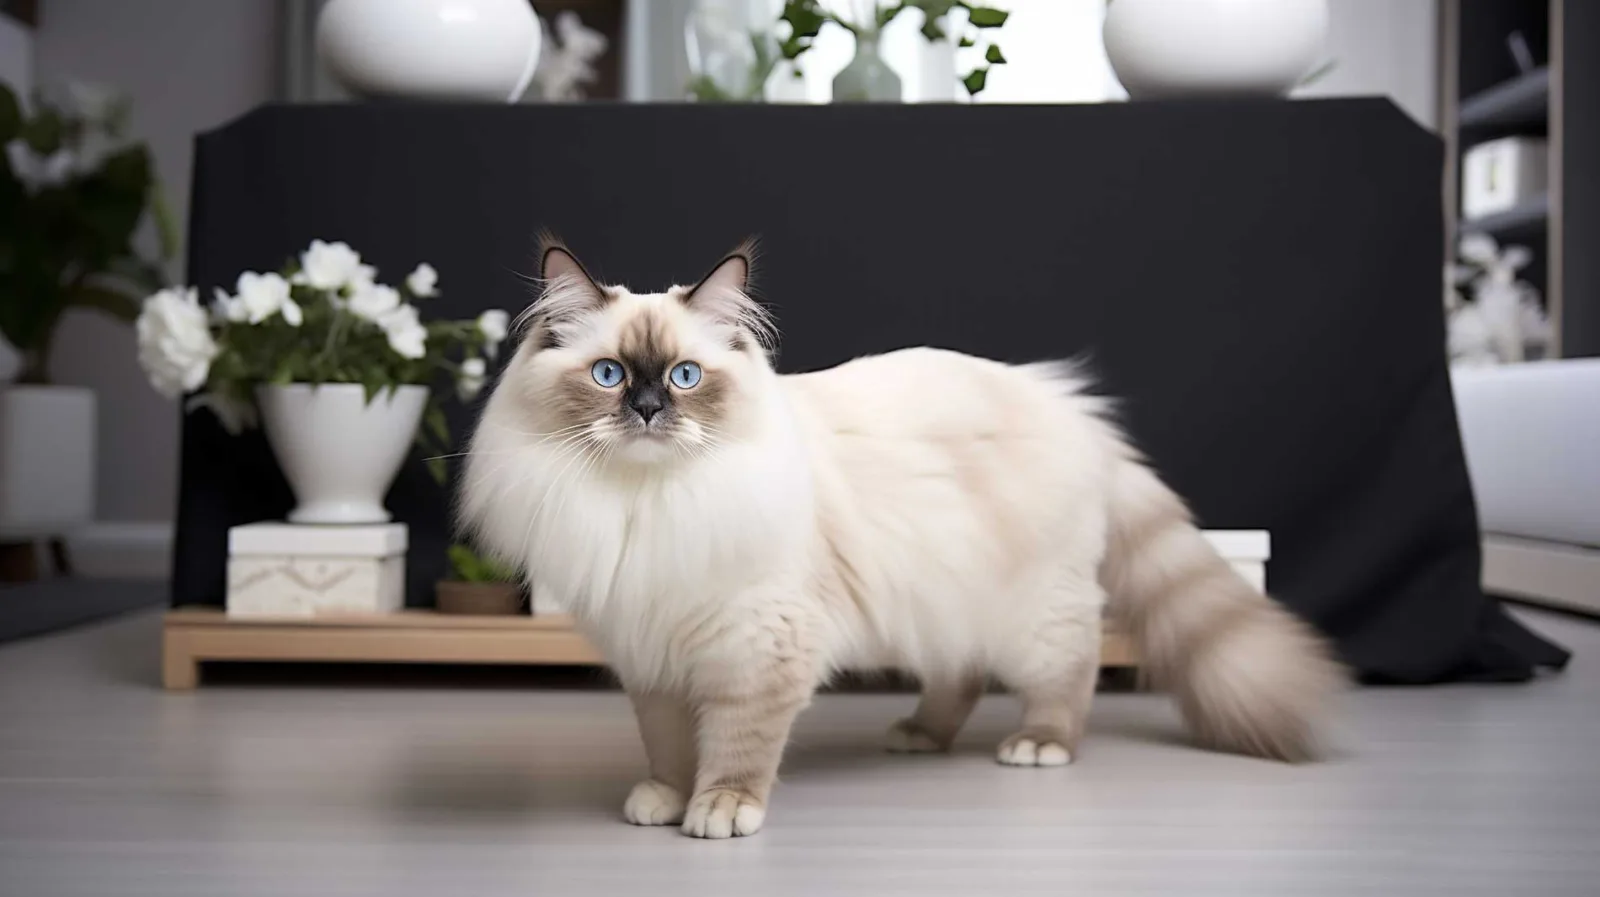 Bright birman cat standing sideways in front of a black and white scene with flowers